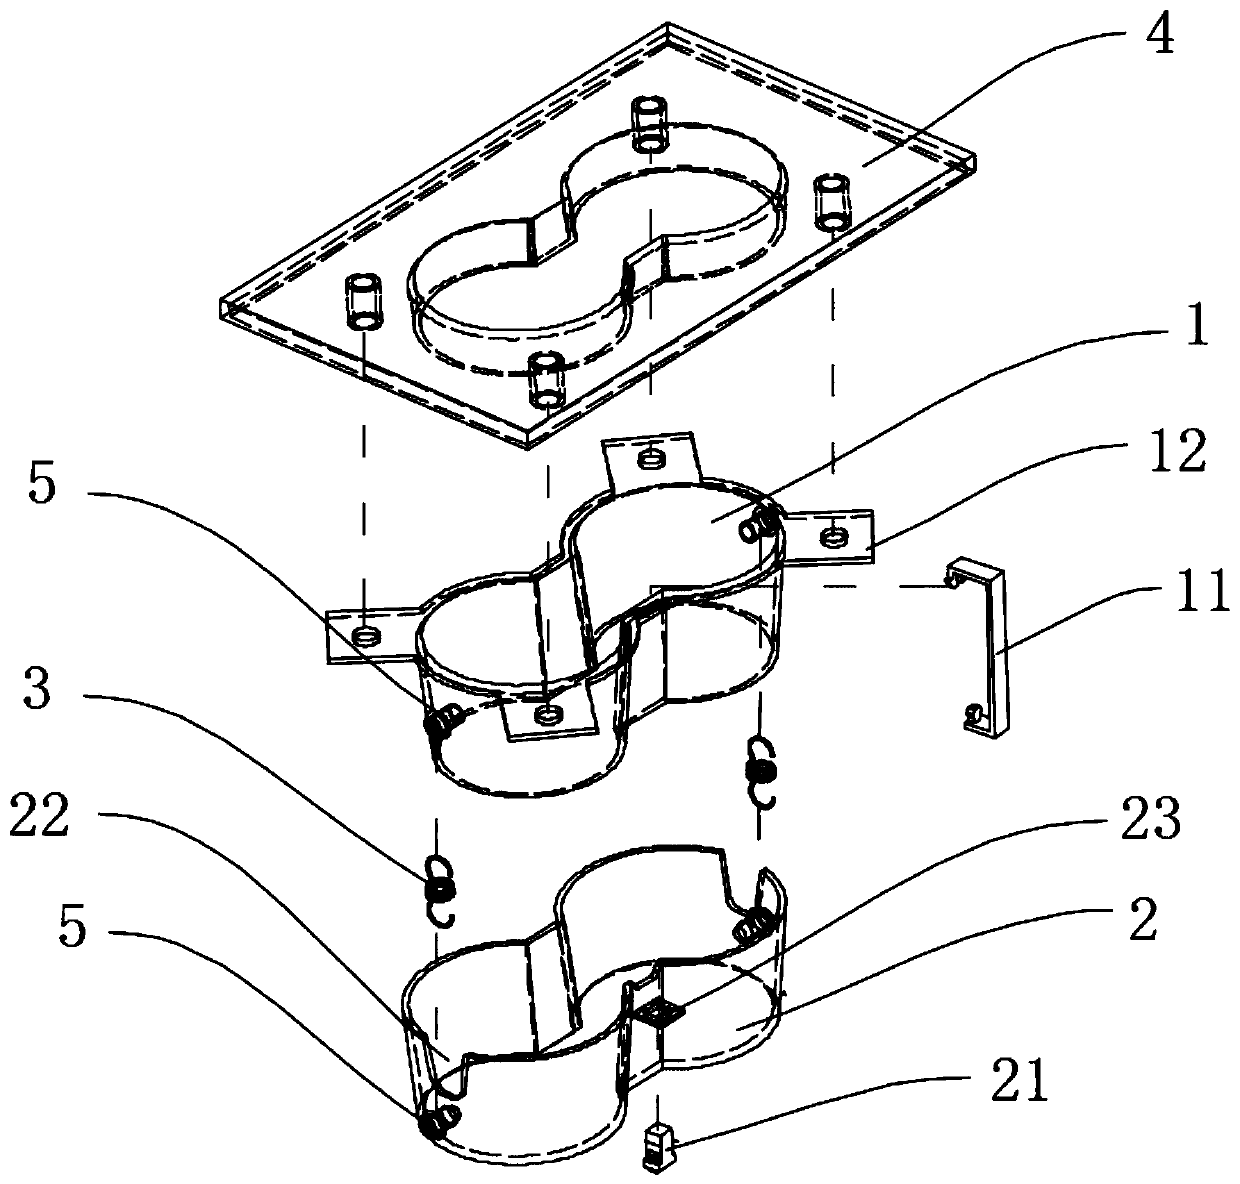 Cup holder structure